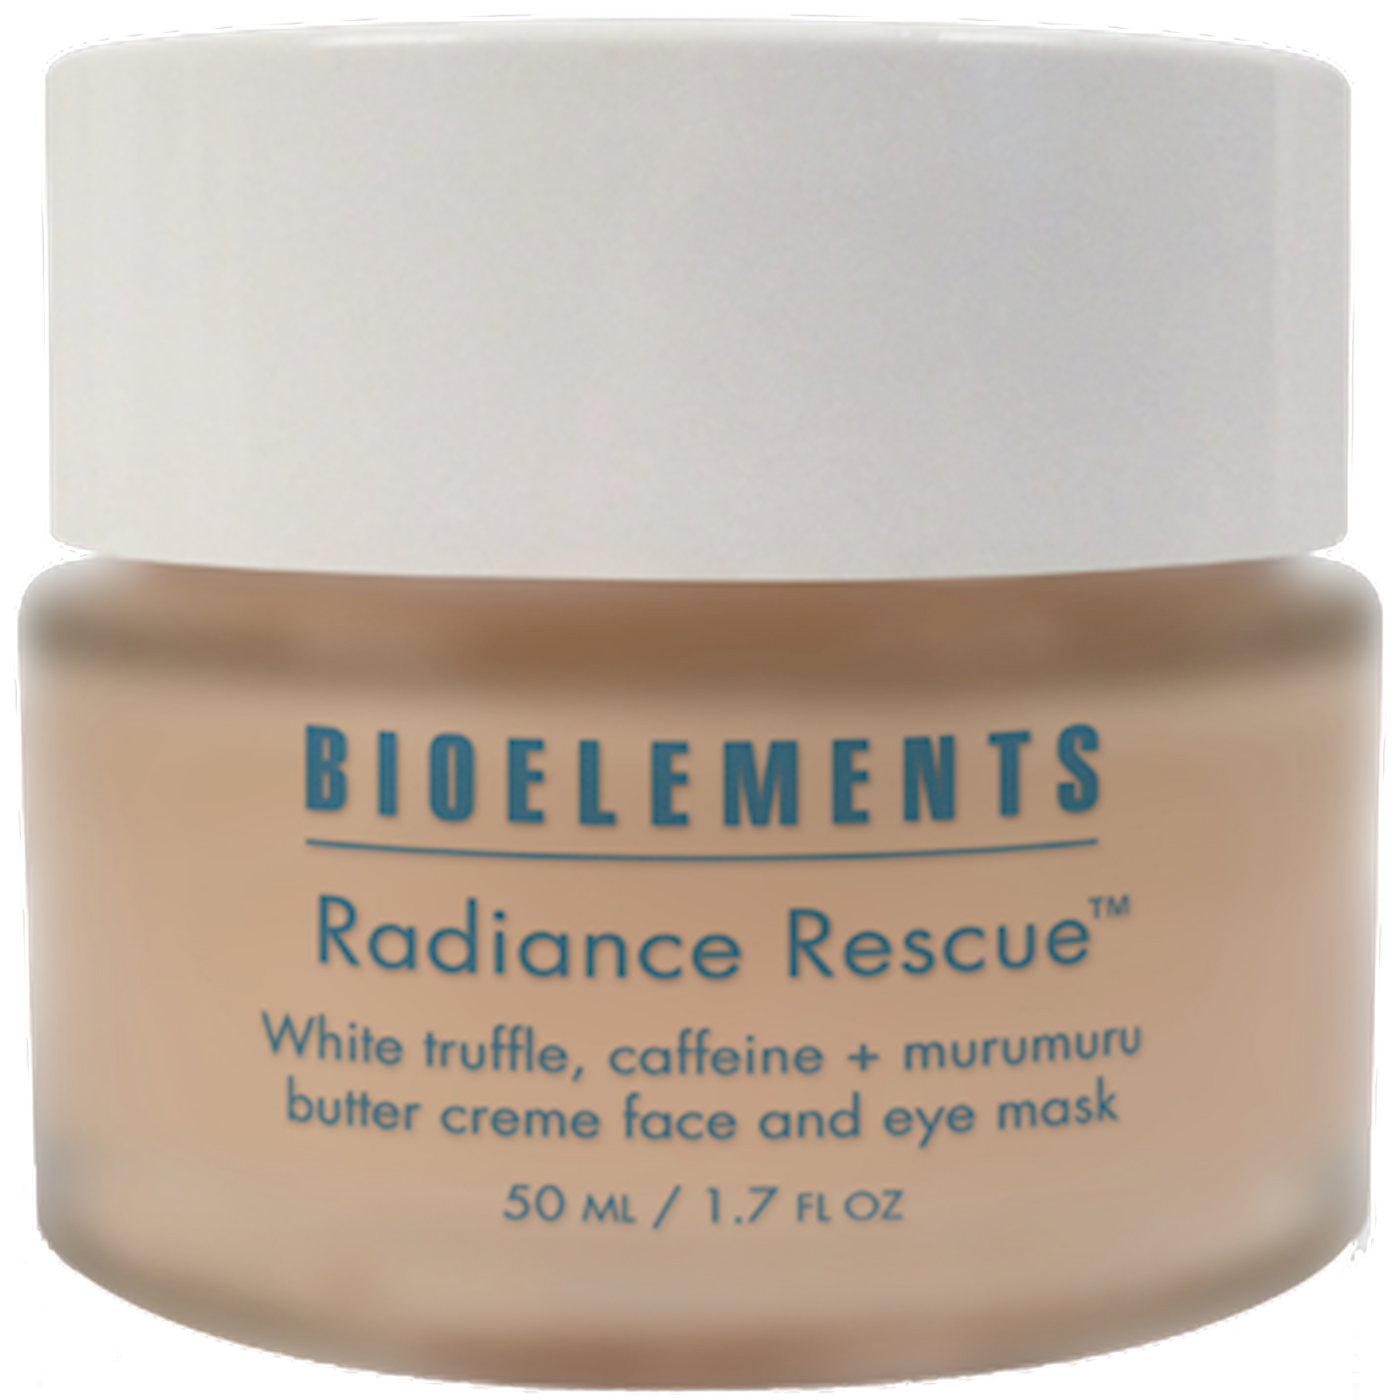 Radiance Rescue  Curated Wellness